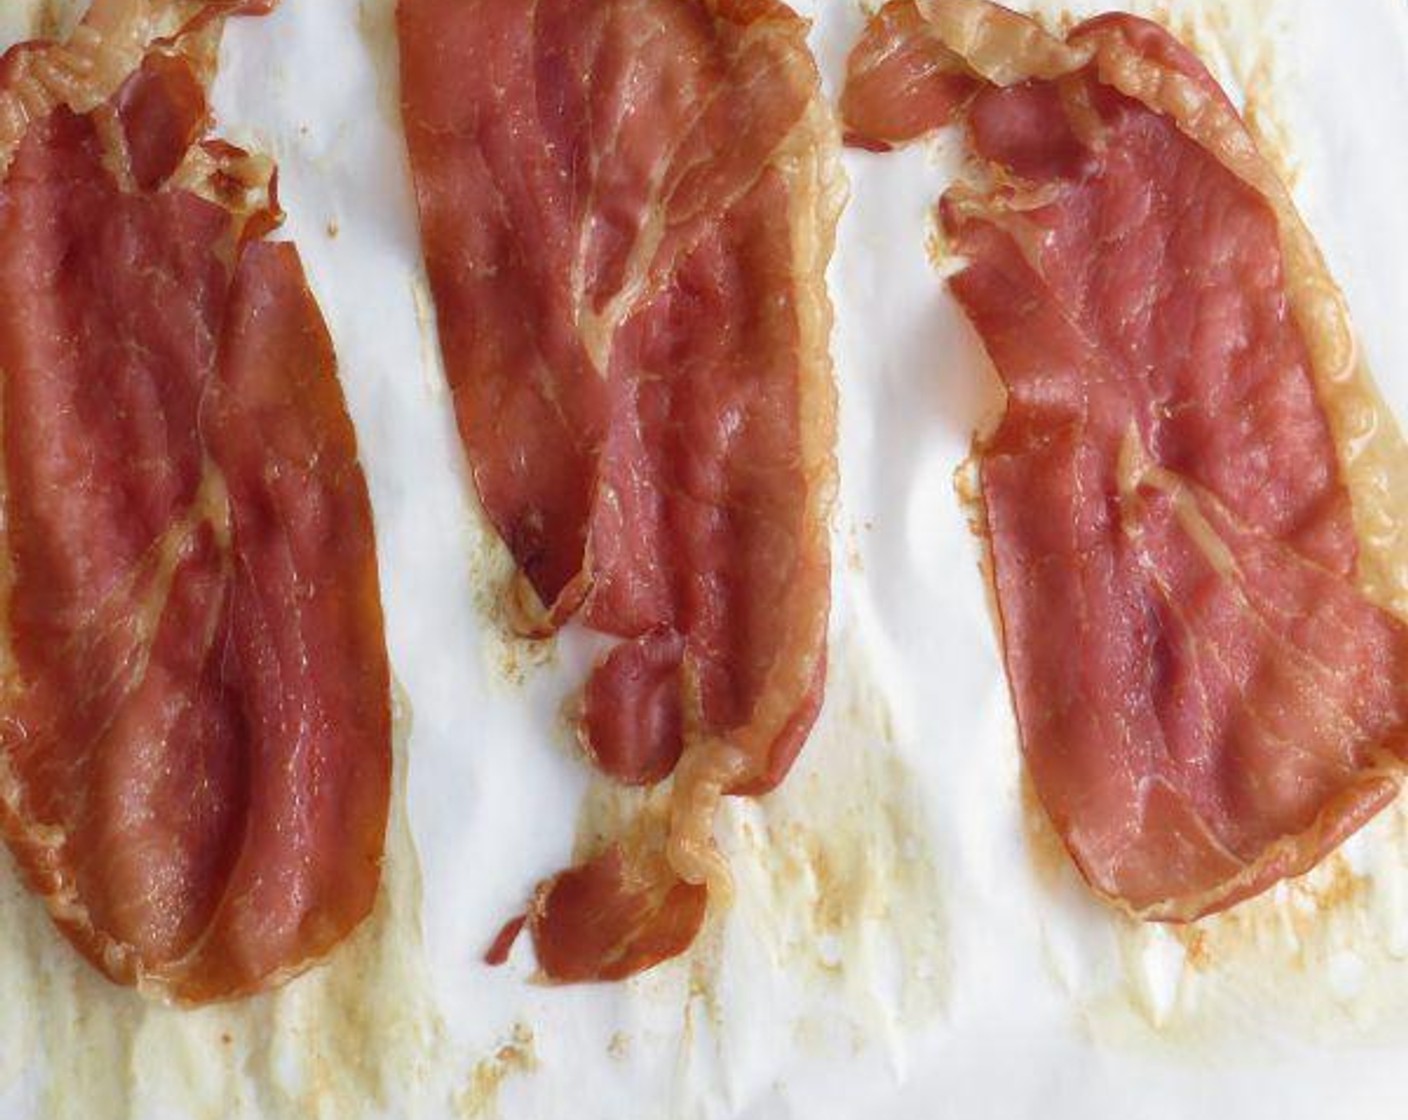 step 2 Line a baking sheet with parchment paper and arrange Prosciutto (4 slices) in a single layer. Bake for 10-12 minutes, until prosciutto is crispy. Remove from oven to cool.